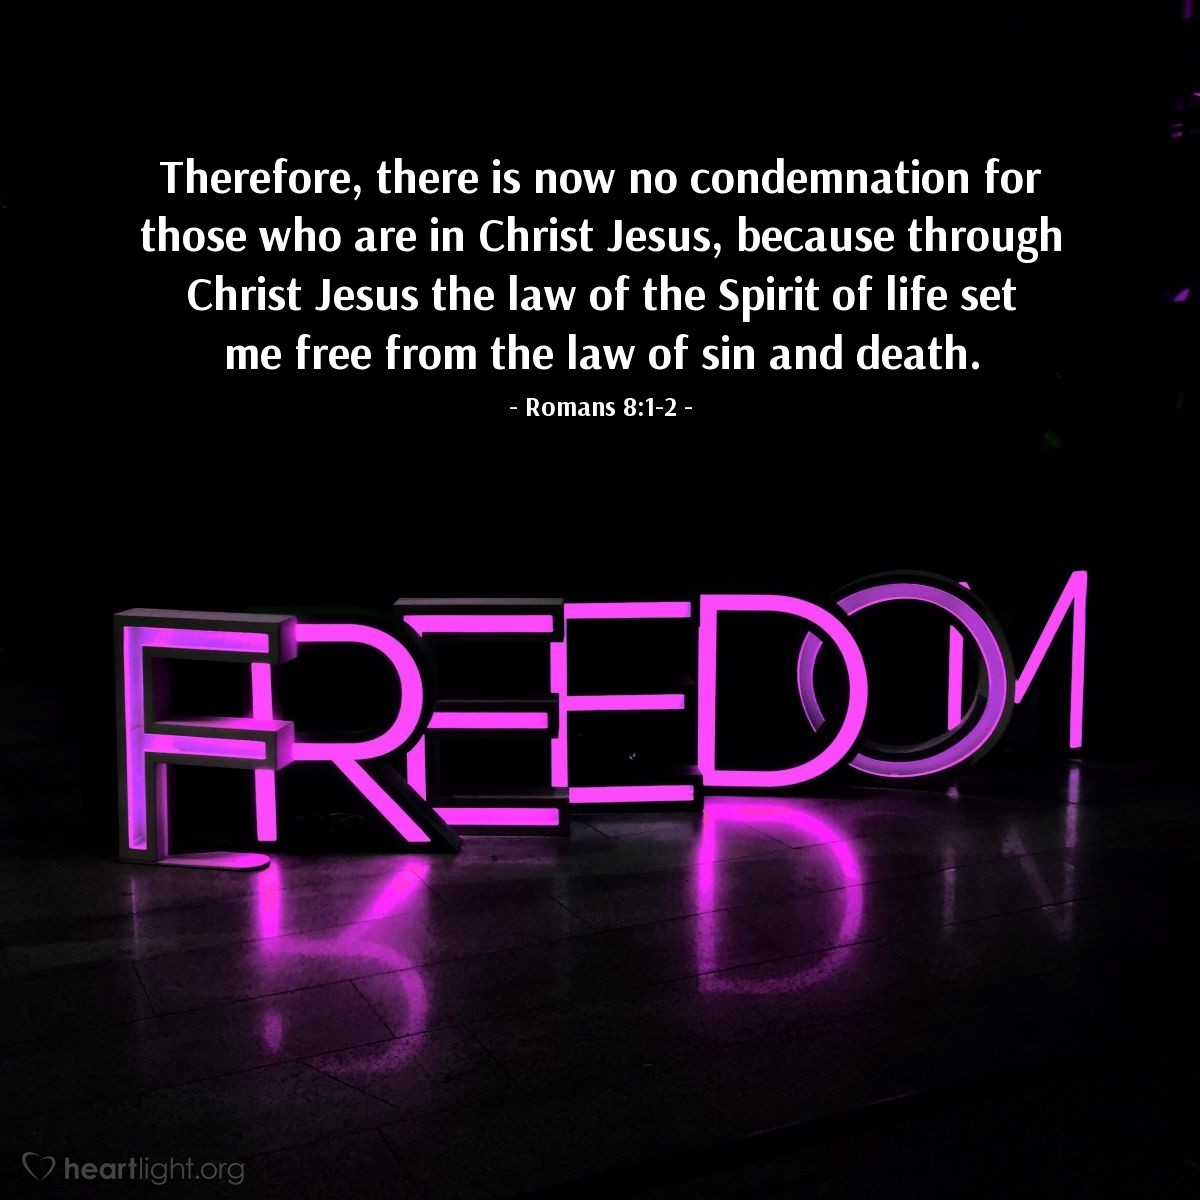 Illustration of Romans 8:1-2 — Therefore, there is now no condemnation for those who are in Christ Jesus, because through Christ Jesus the law of the Spirit of life set me free from the law of sin and death.